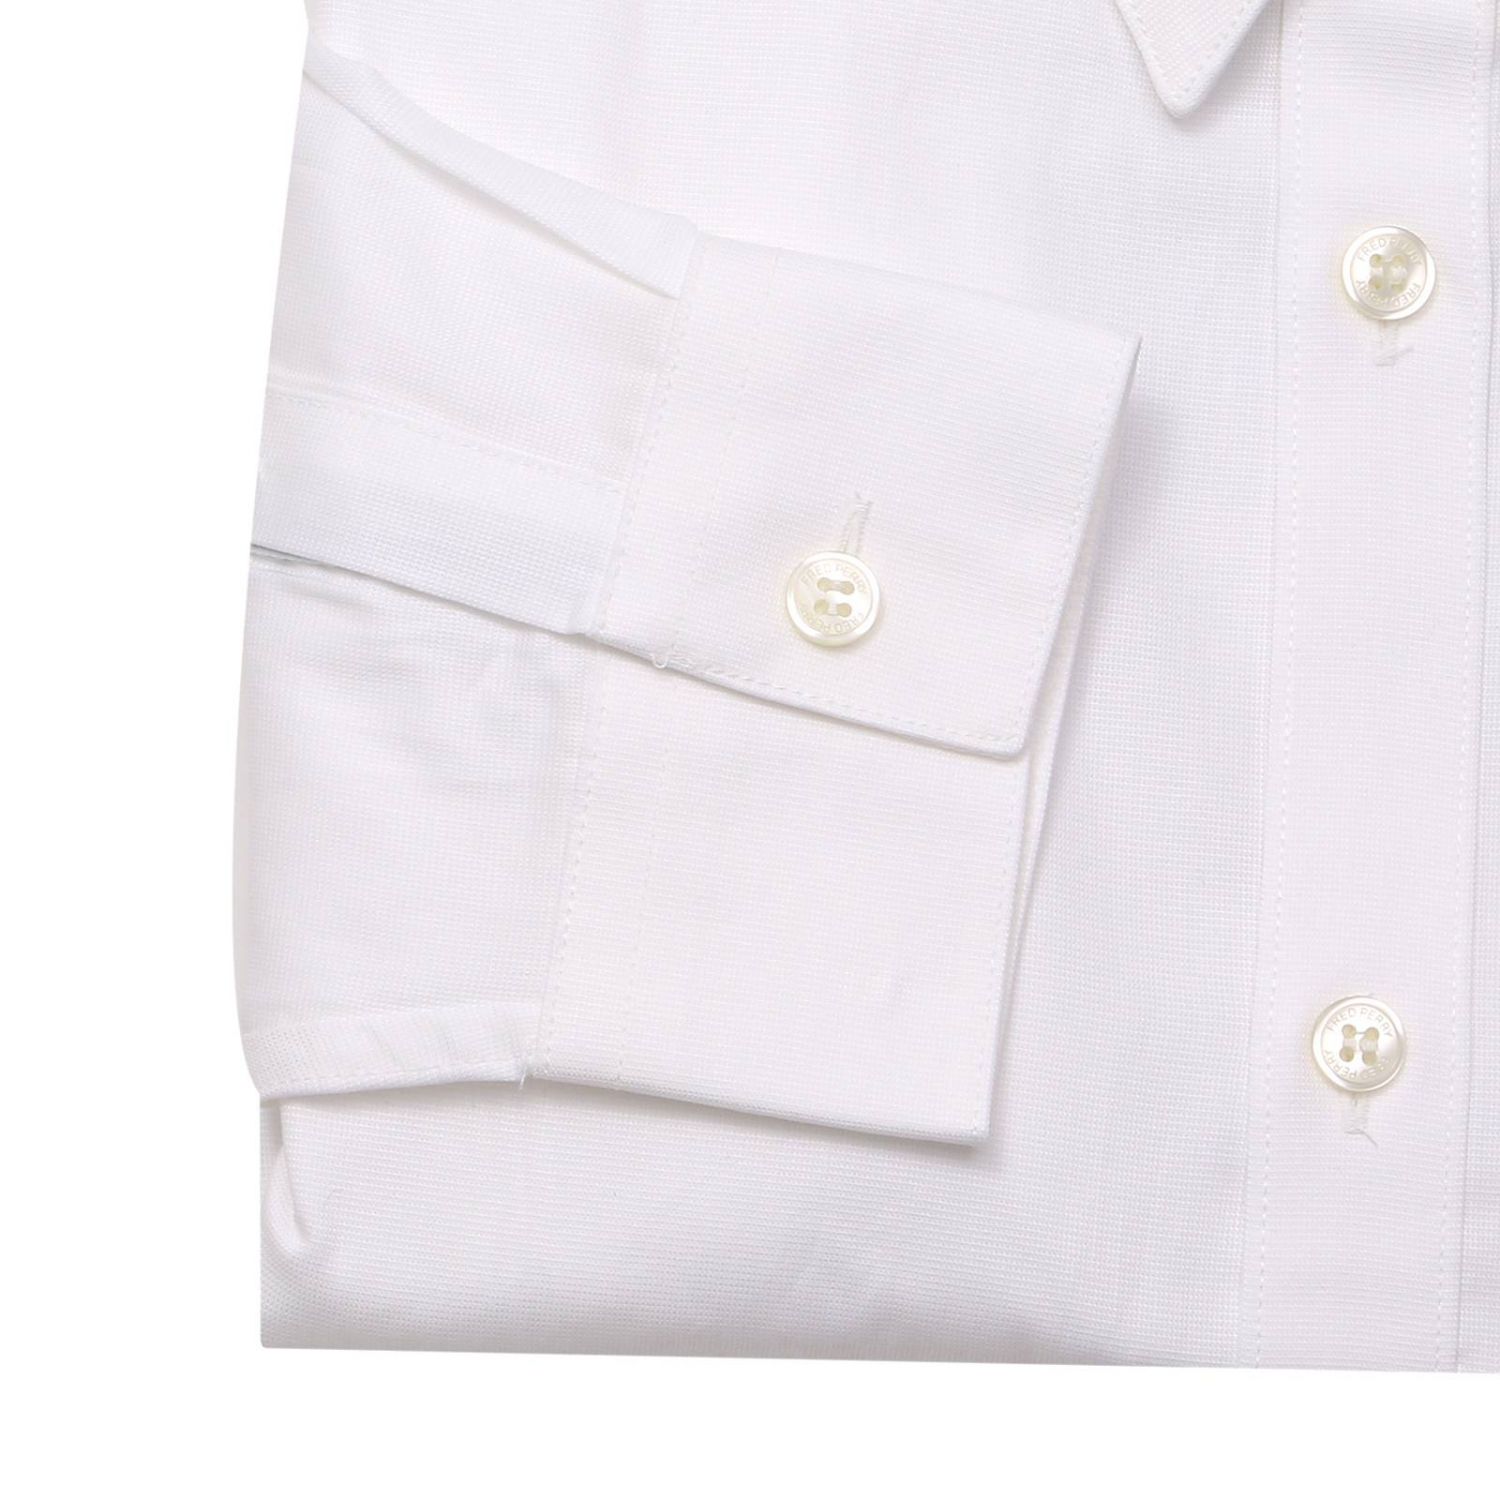 Fred Perry Outlet: Shirt men - White | Shirt Fred Perry M3523 GIGLIO.COM